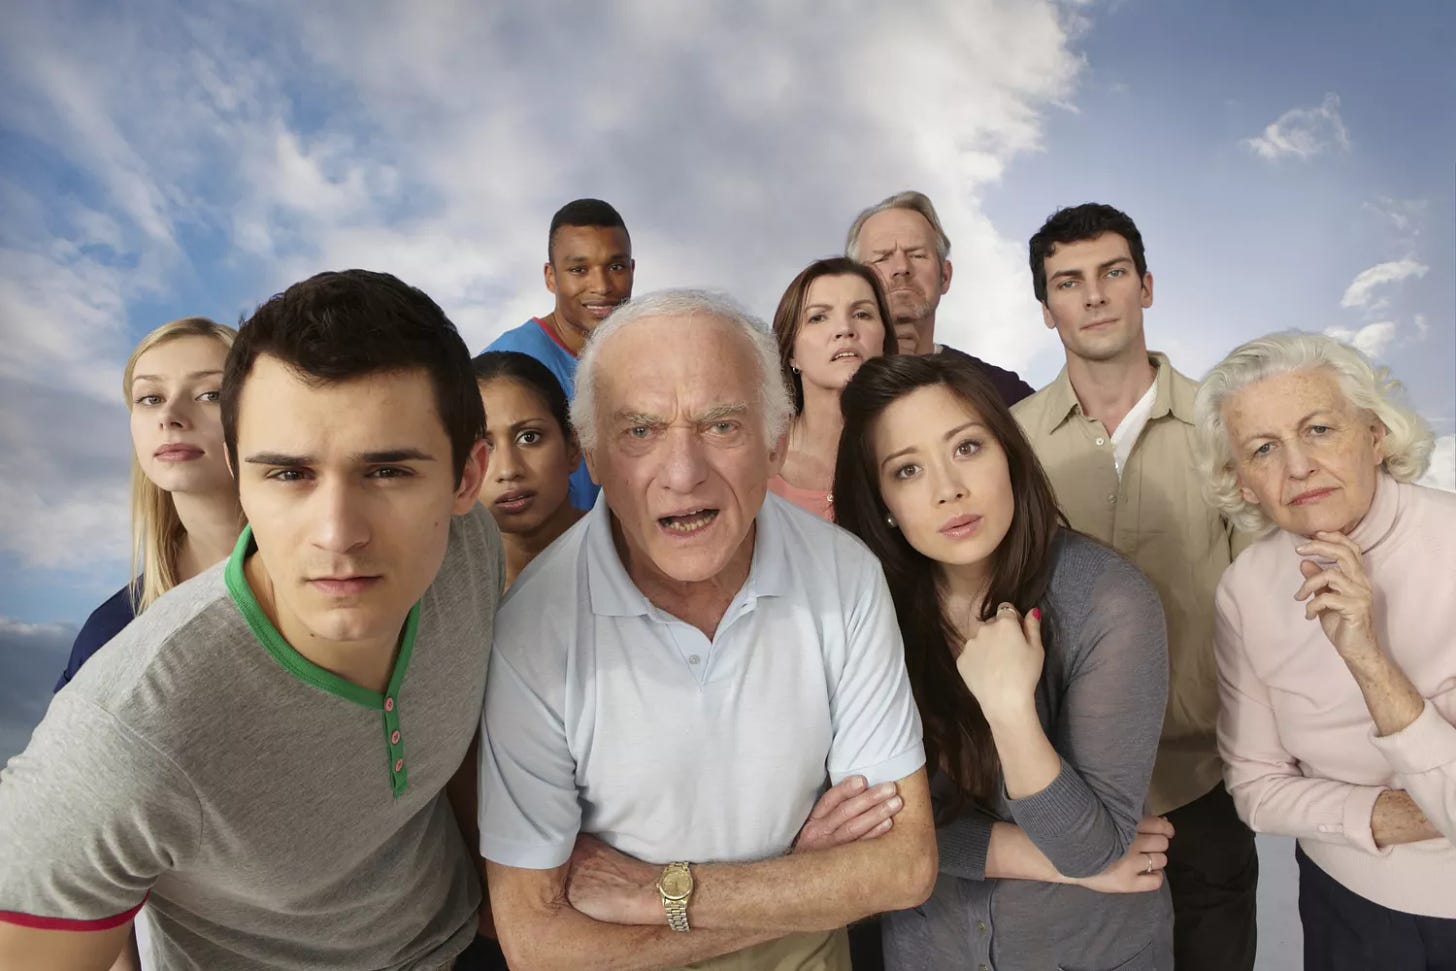 Group of people looking angrily at camera